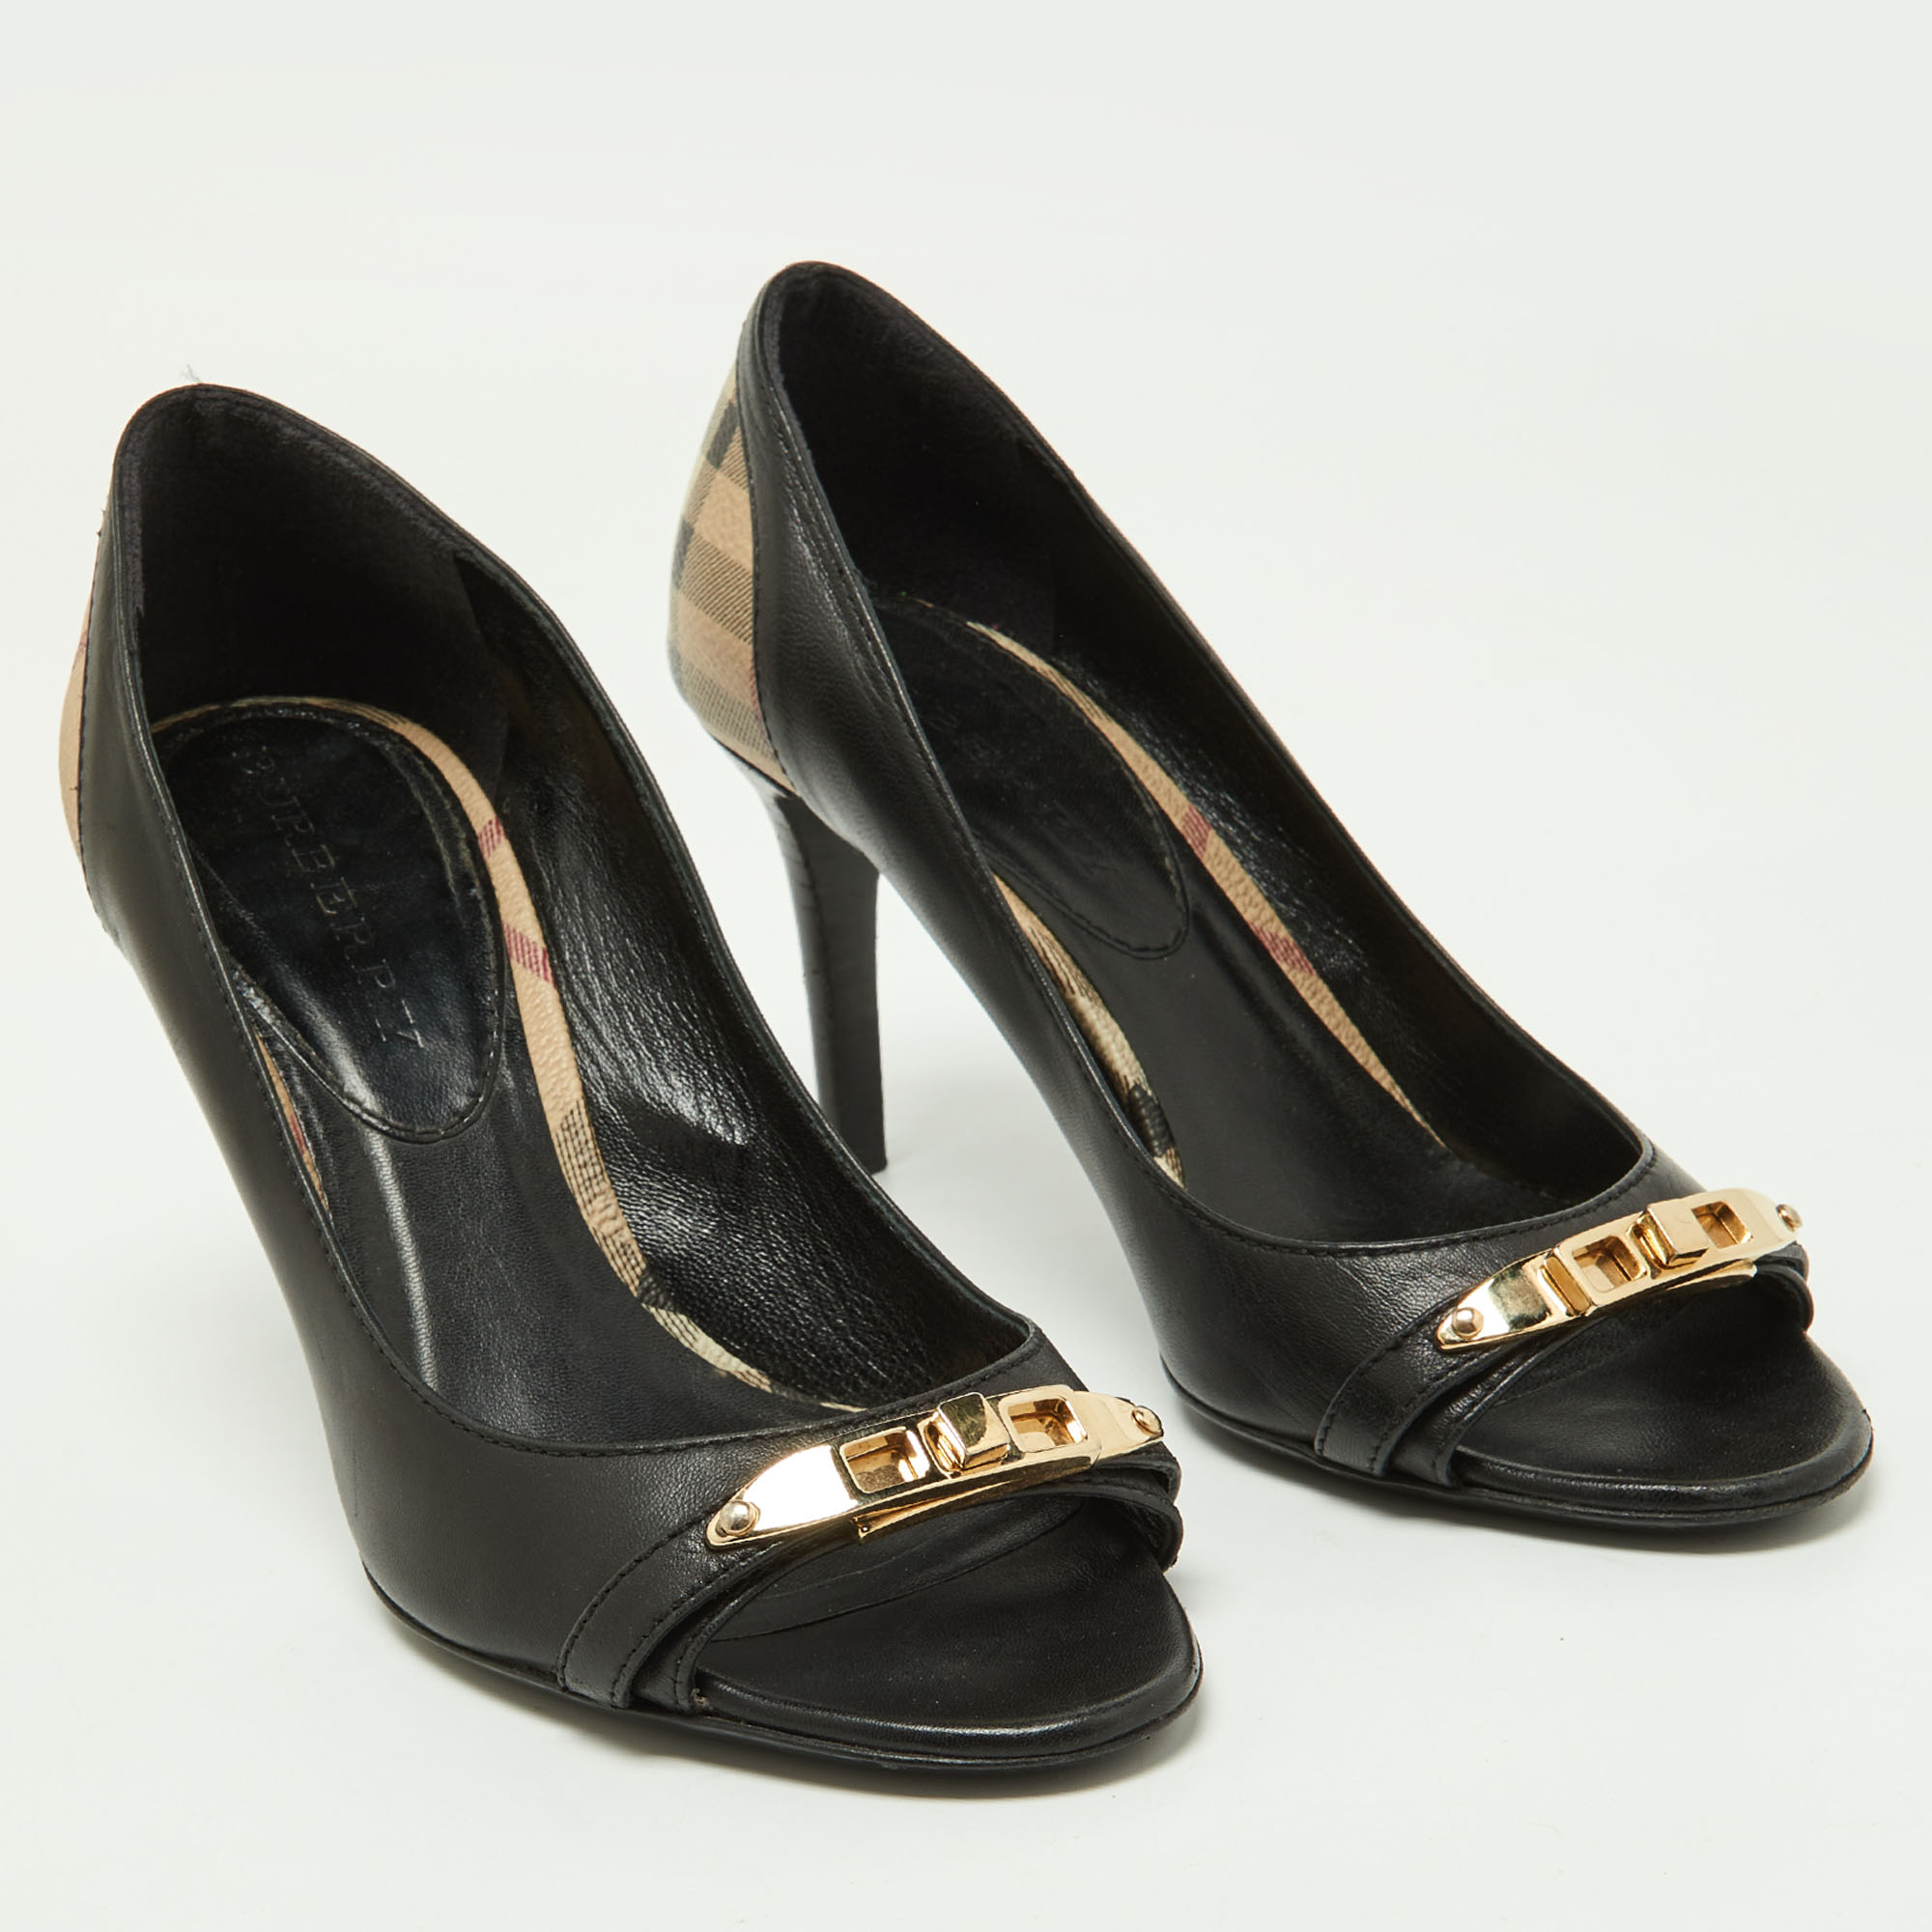 Burberry Black/Beige Leather And Check Coated Canvas Embellished Open Toe Pumps Size 37